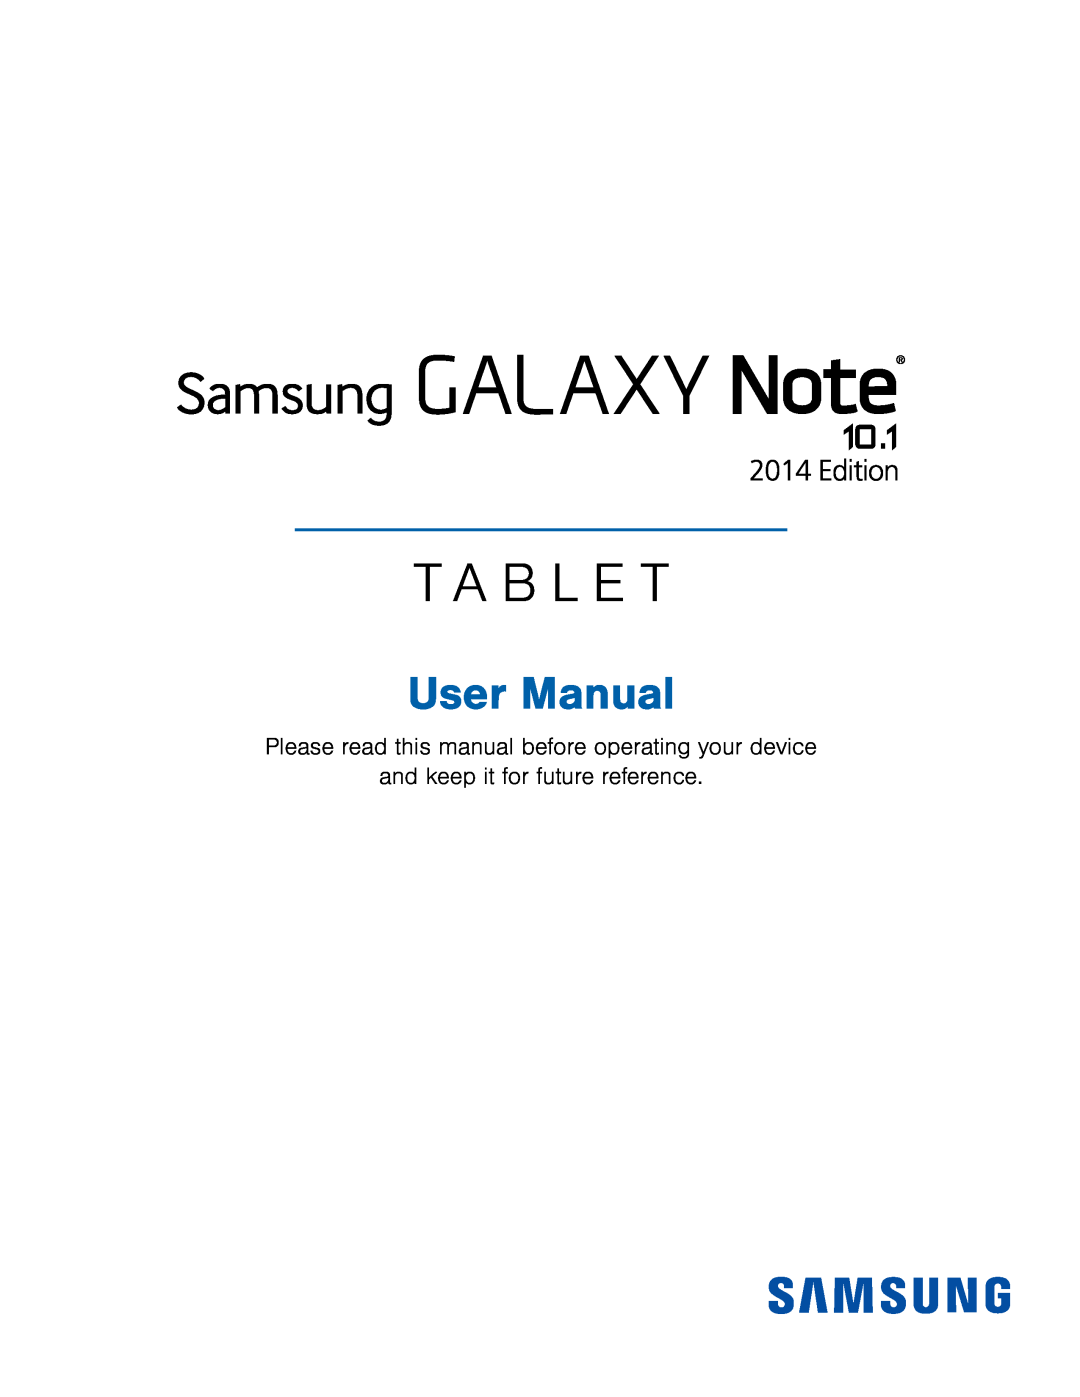 Galaxy Note 10.1 2014 Edition T-Mobile